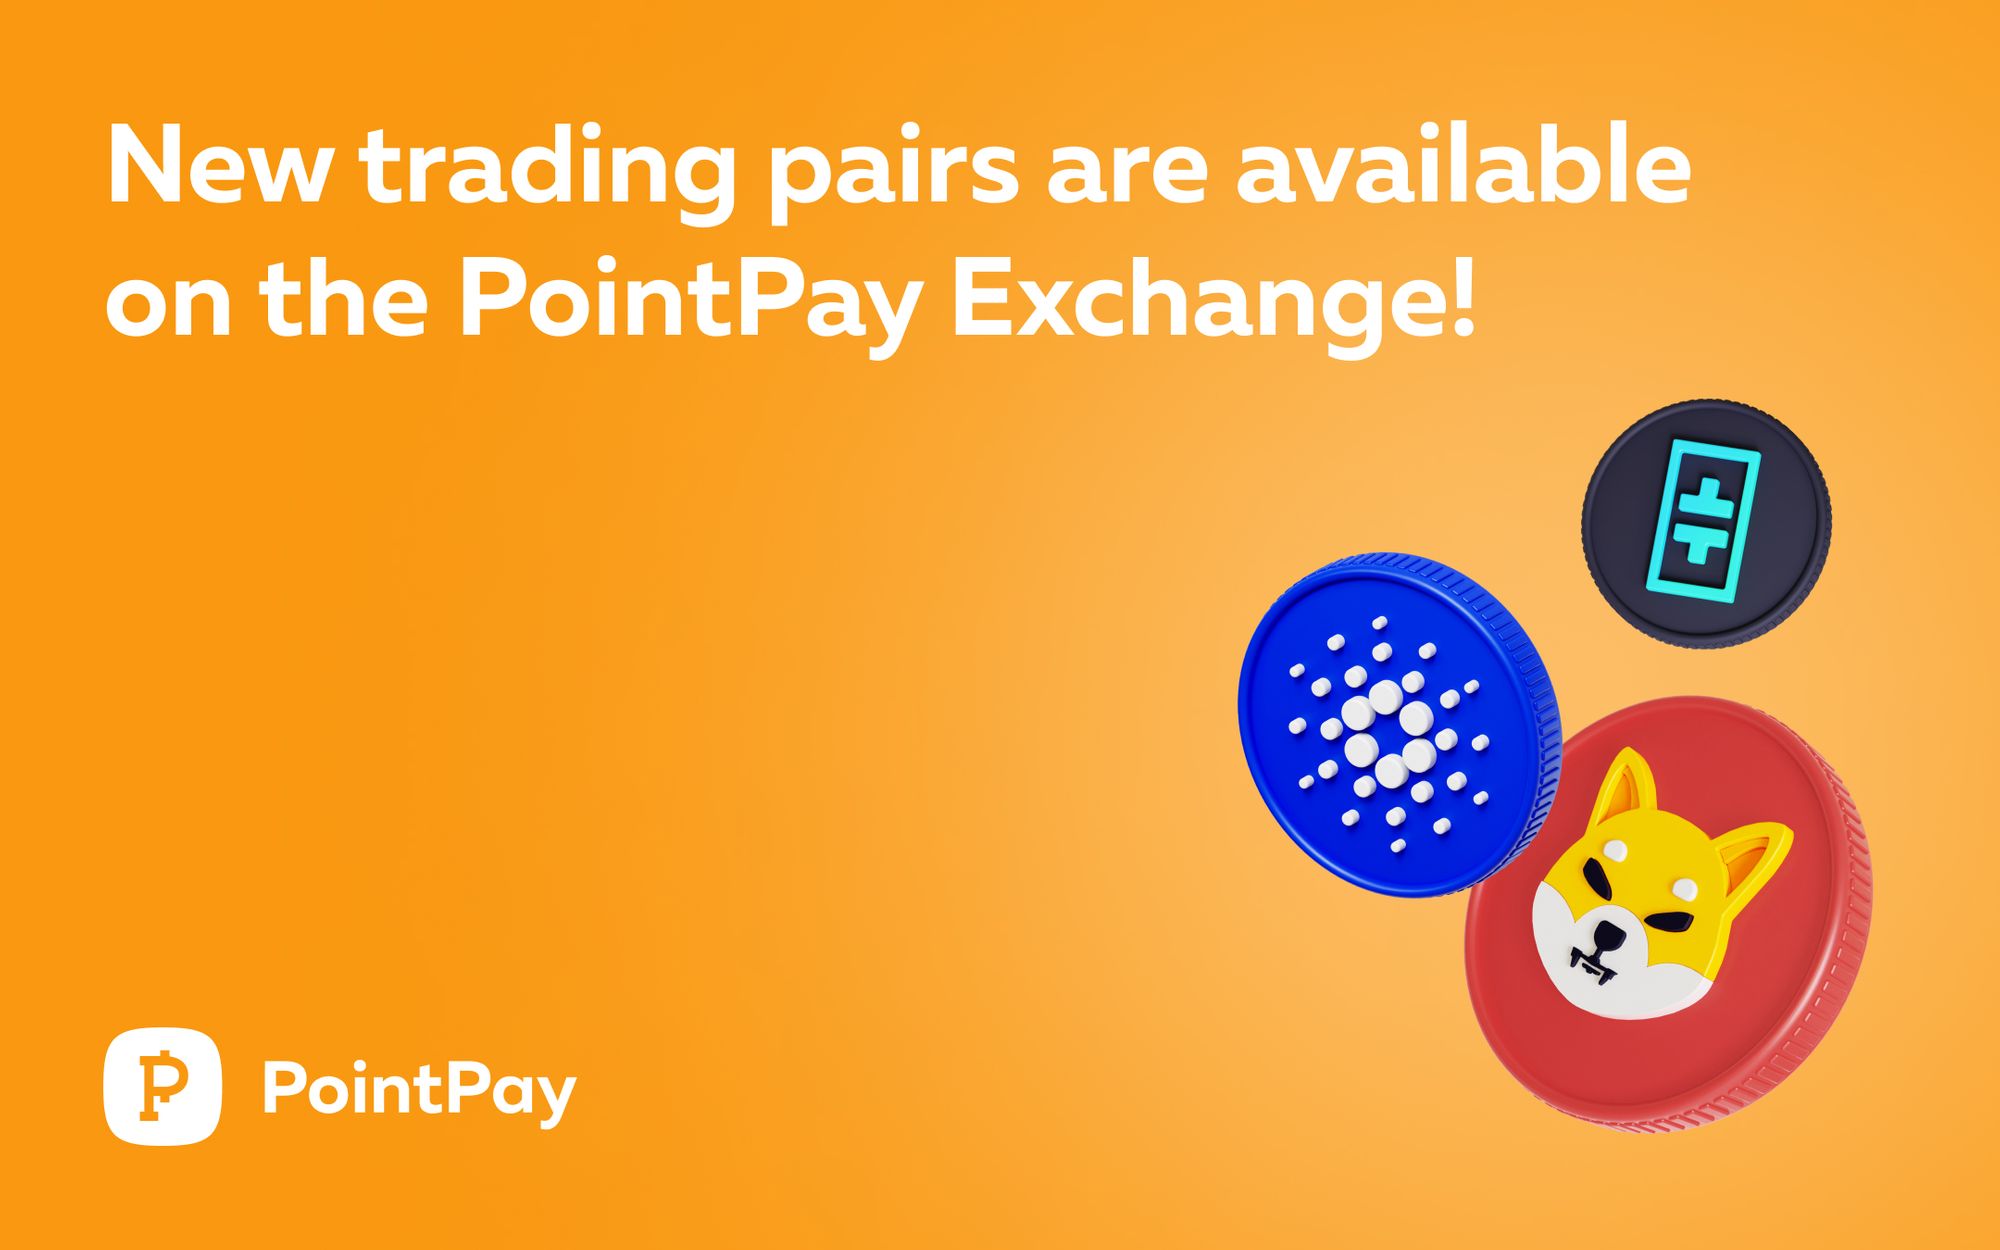 Meet the new trading pairs on the PointPay exchange!